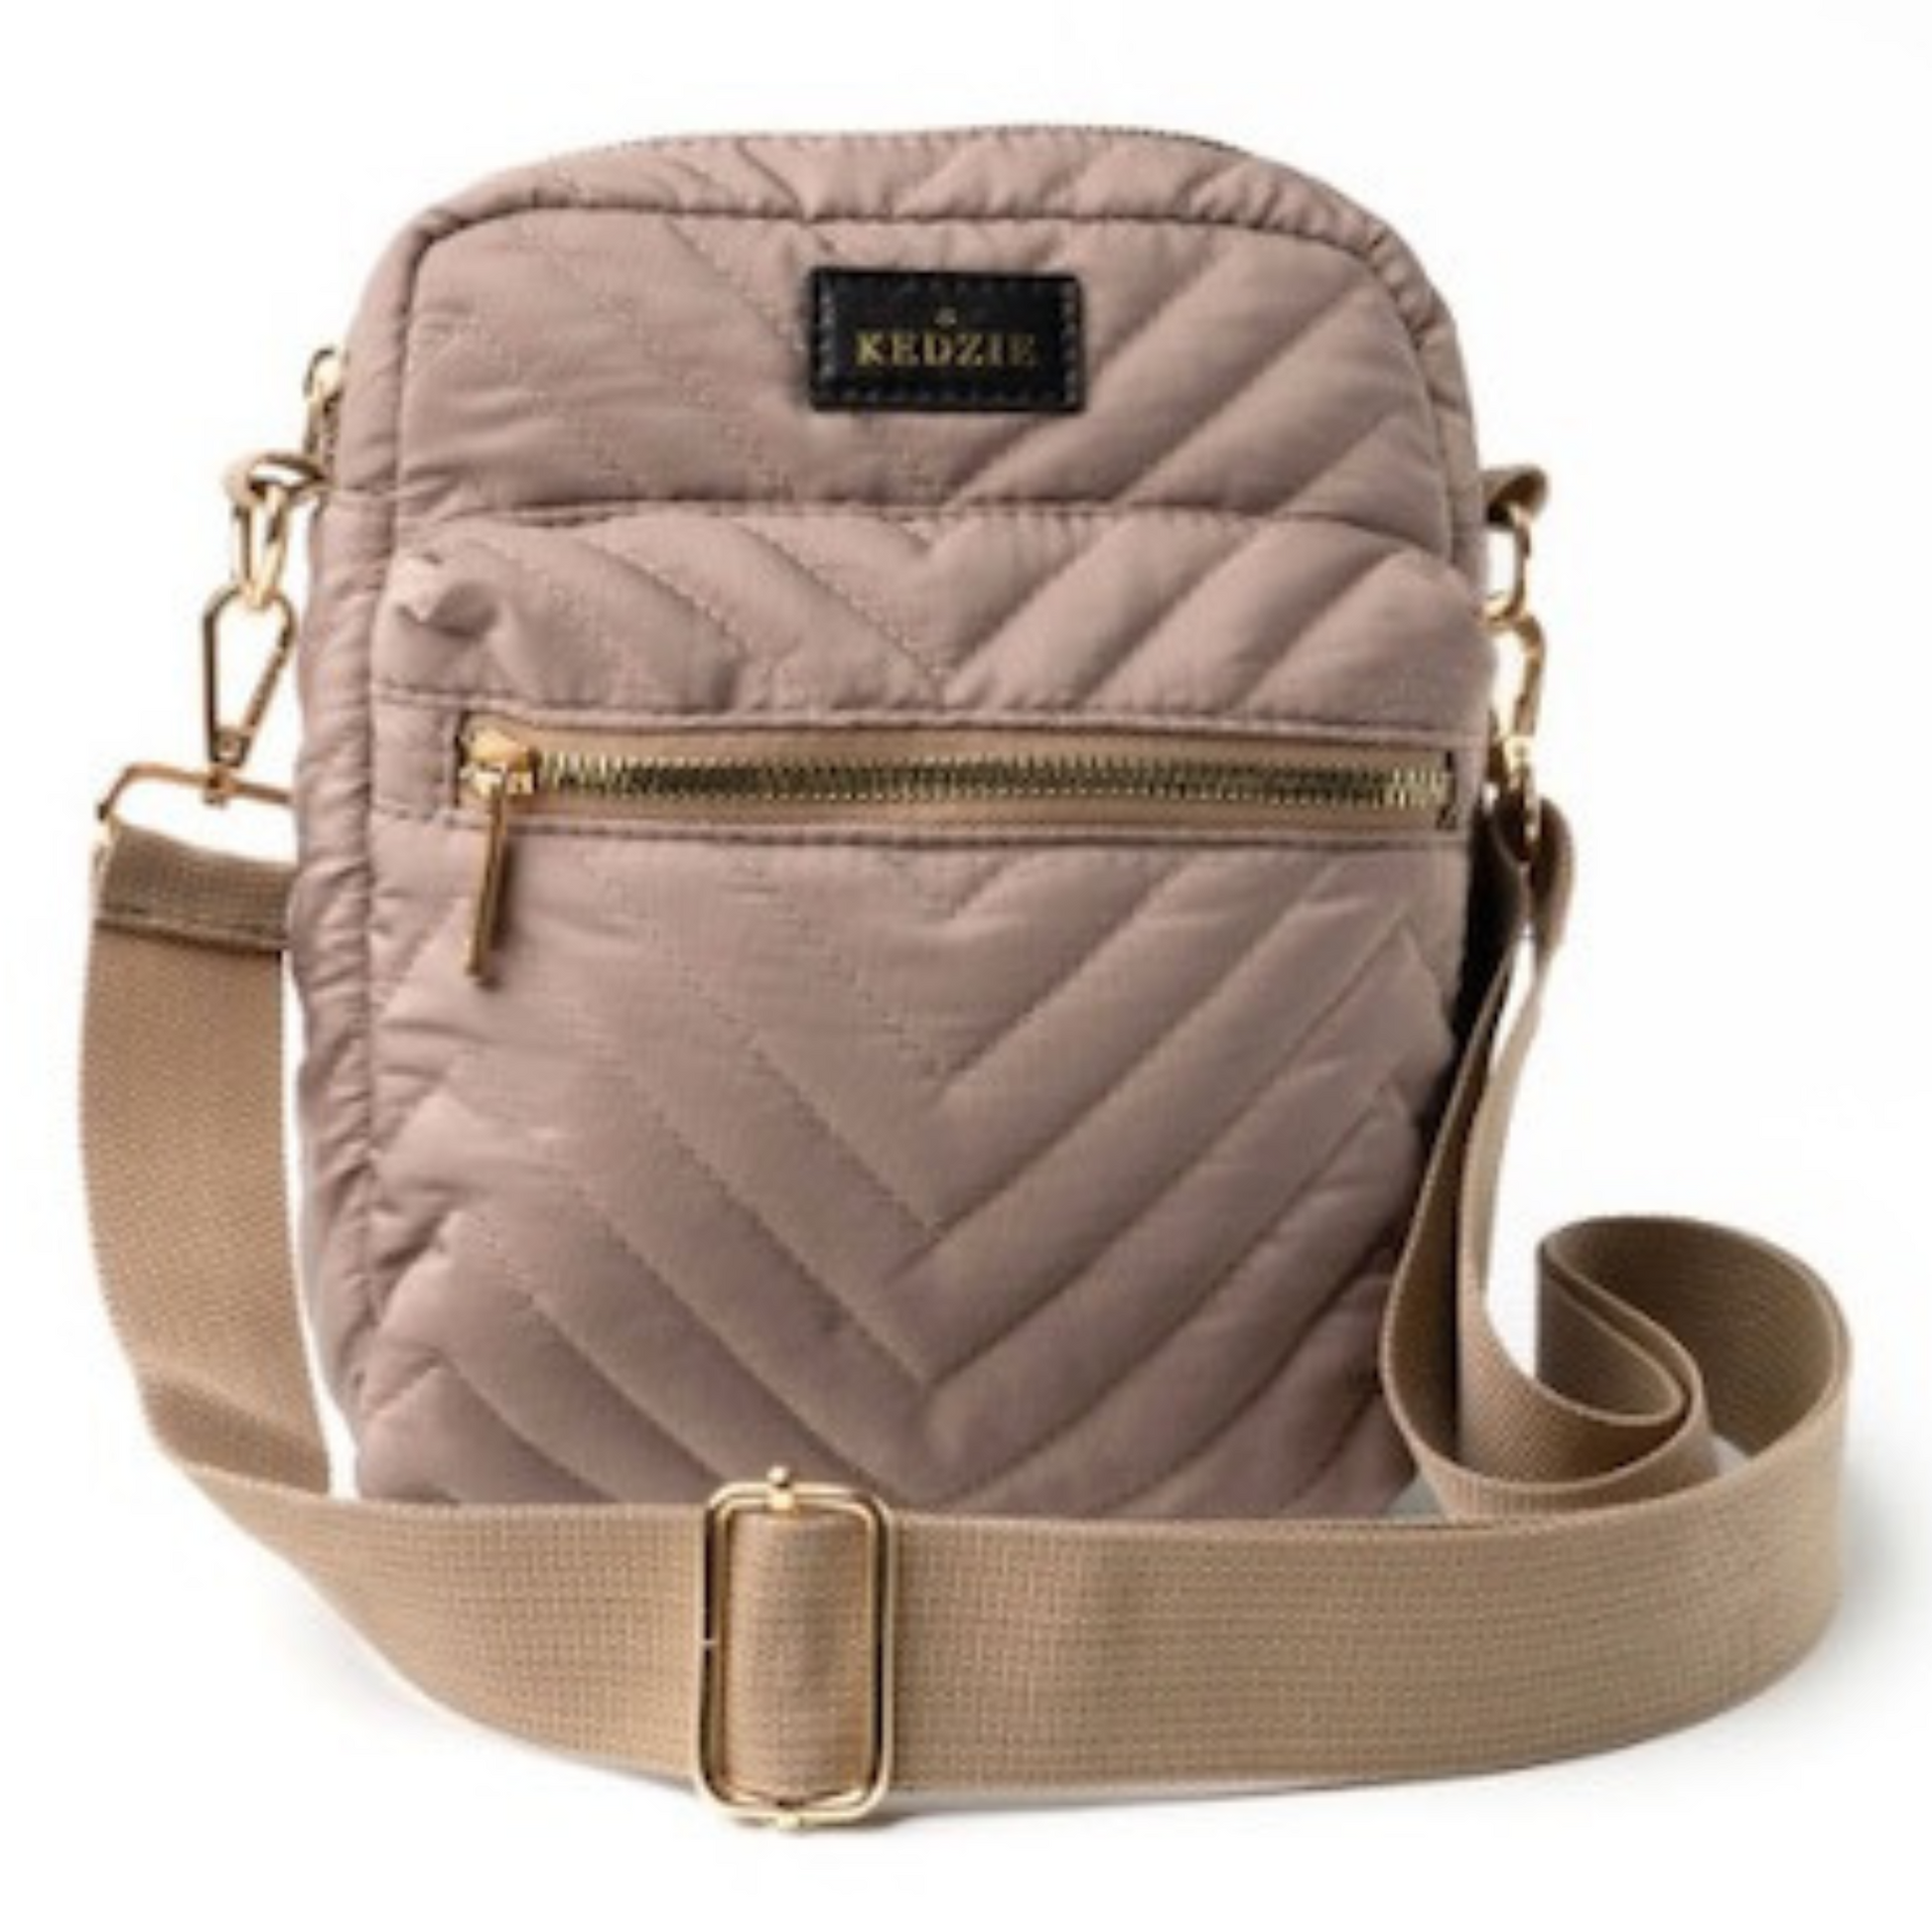 Kedzie quilted crossbody in taupe